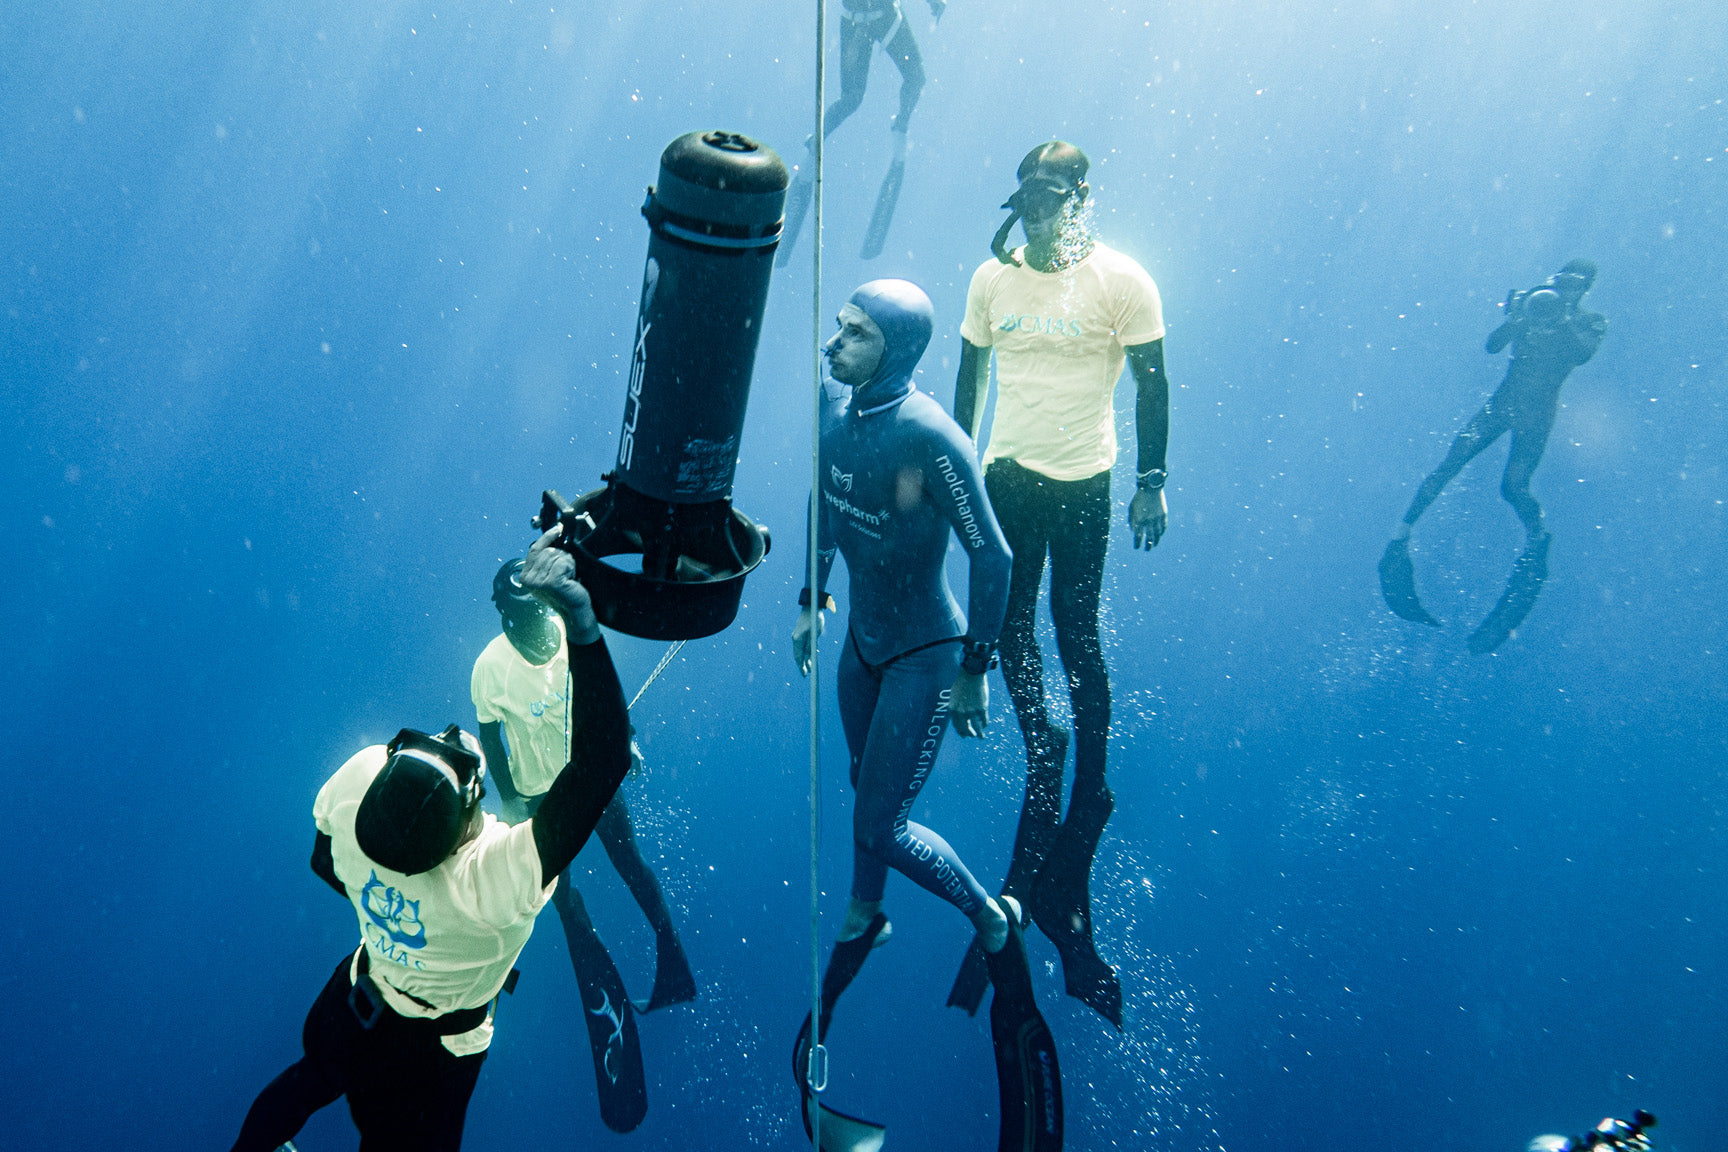 Press Release - 3 New Freediving World Records Achieved with Molchanovs CB2 Carbon Fins